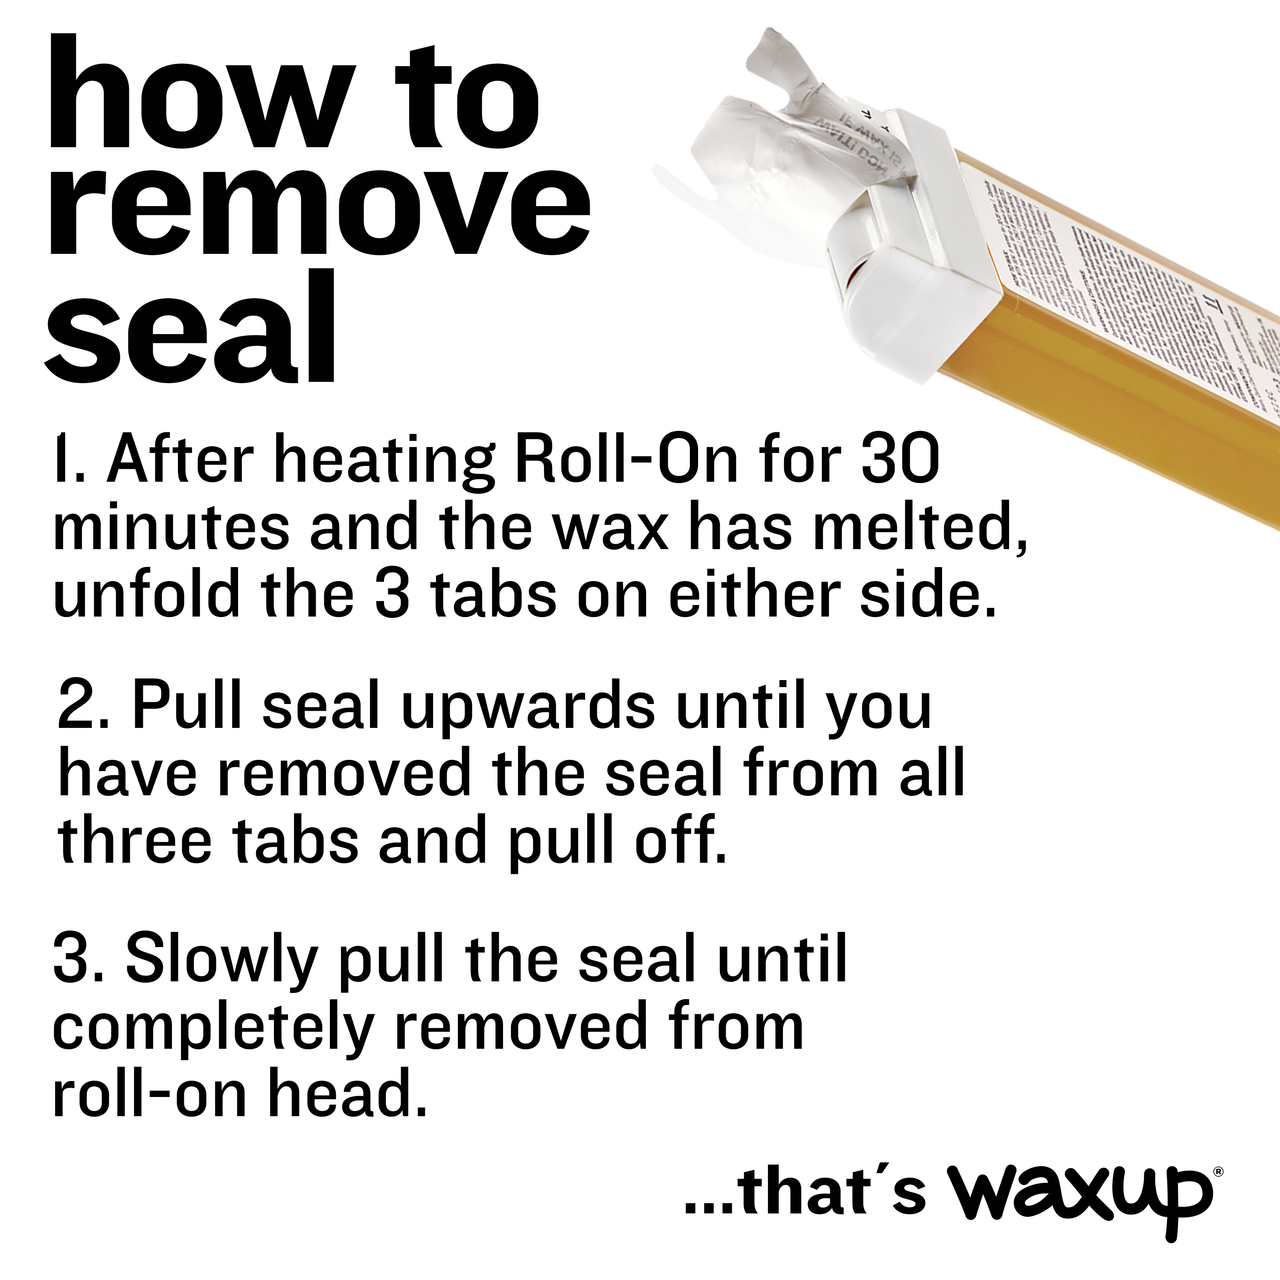 Gold Roller Waxing Kit Refill - thatswaxup -  - Roller Waxing Kit - waxup hair removal wax body waxing kit women and men professional waxing supplies